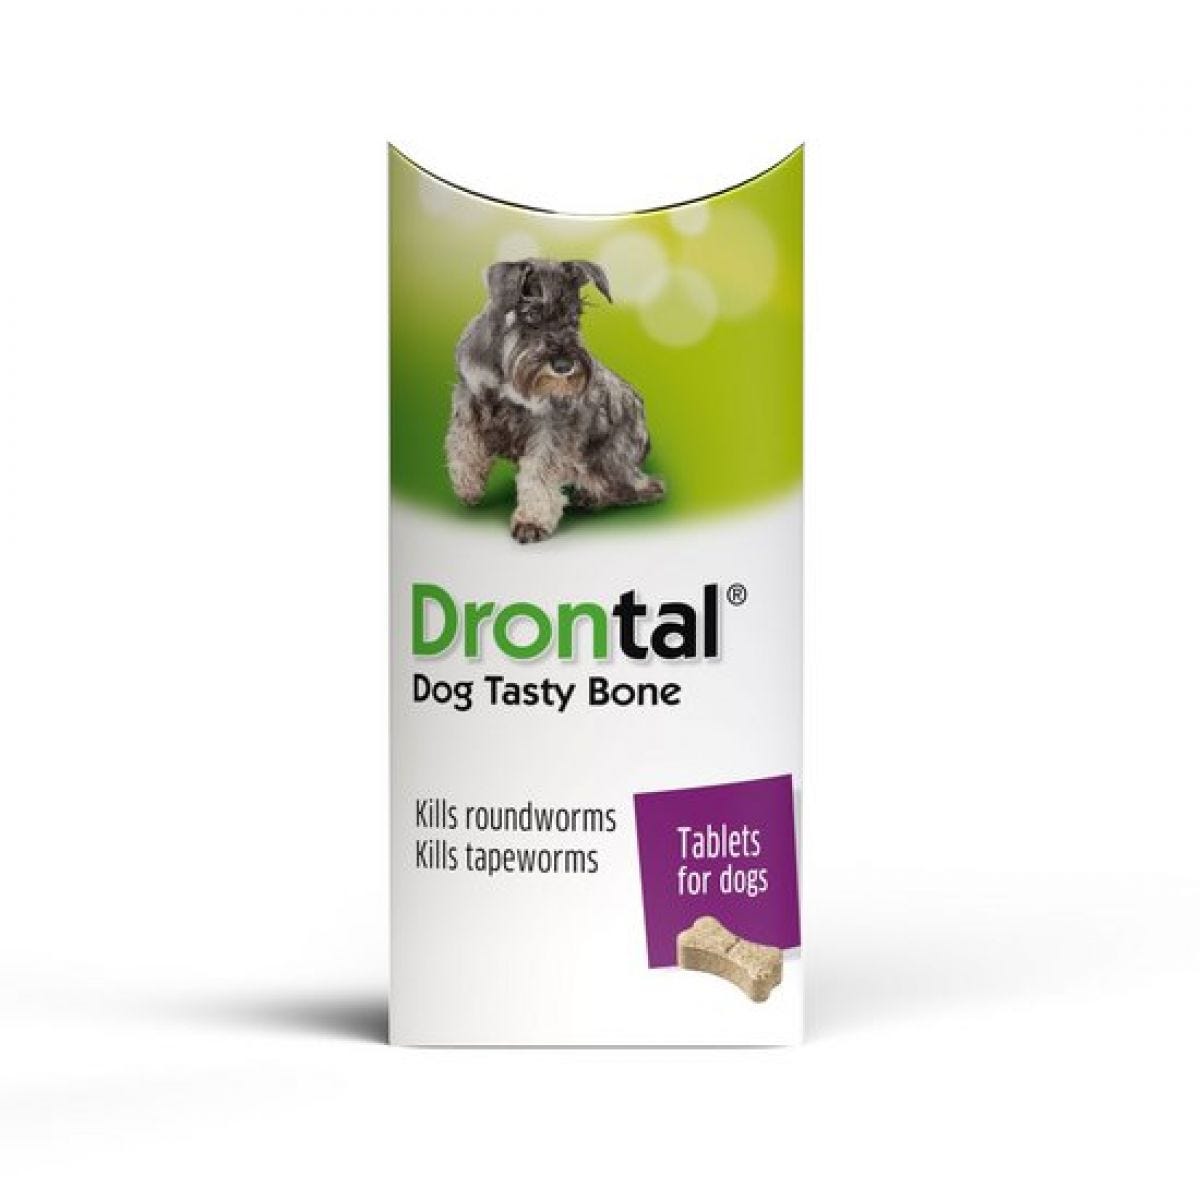 Drontal Dog Worming Tablets - 1 Tablet>Vermifughi>Orchard